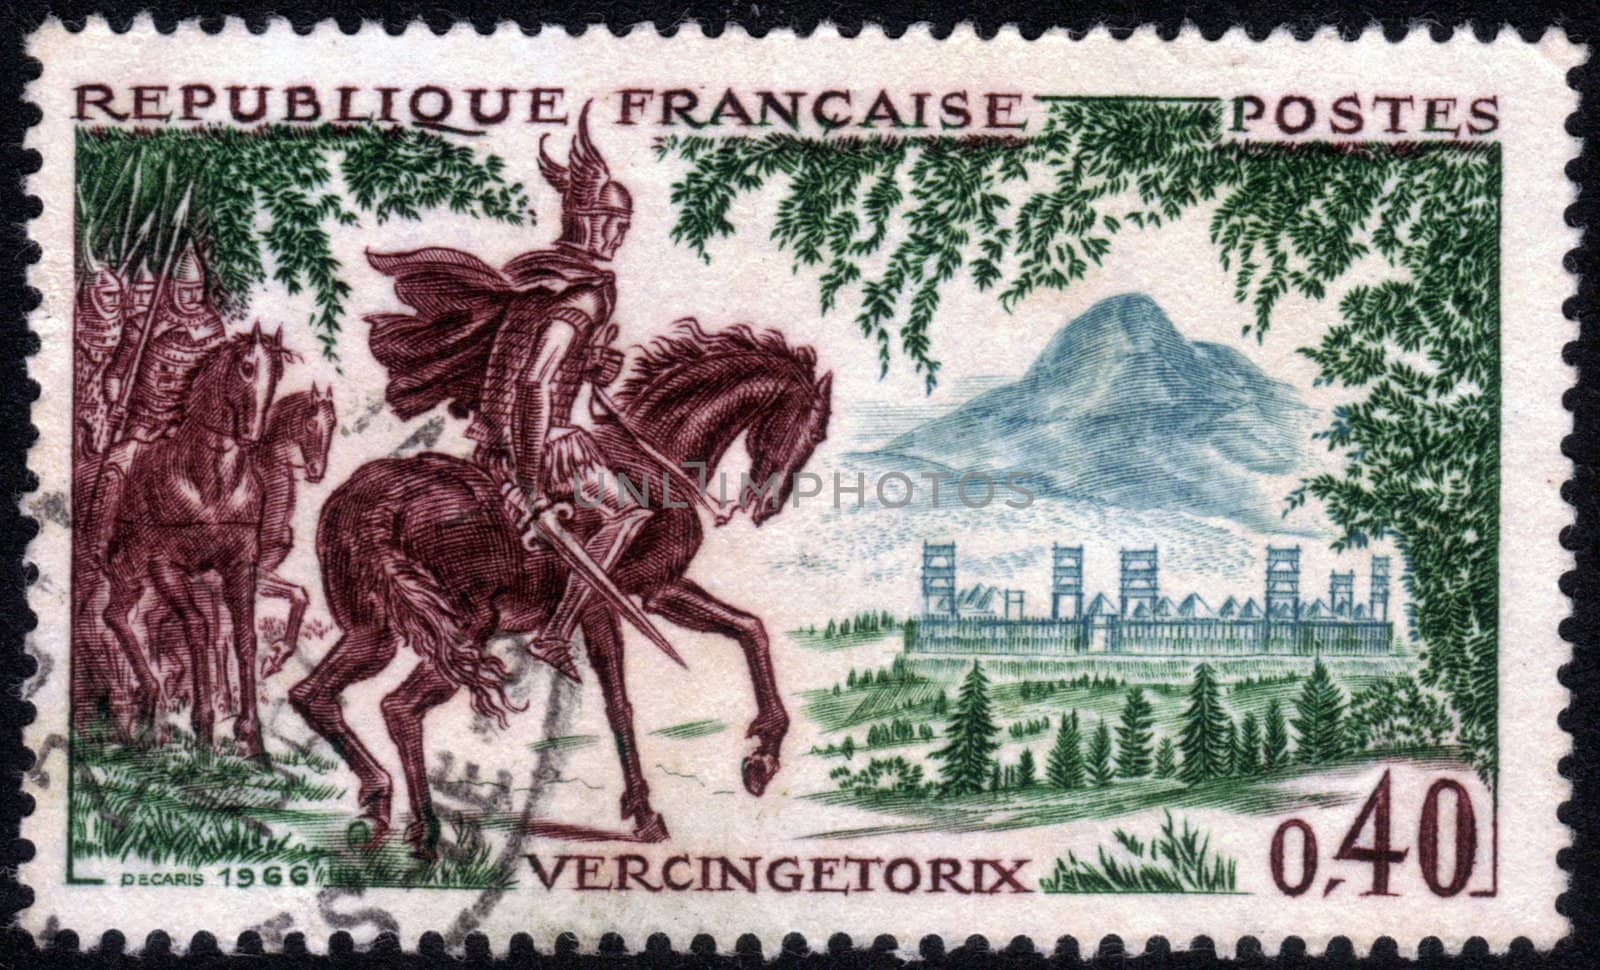 FRANCE - CIRCA 1966: A stamp printed in France, shows Vercingetorix, the leader of the ancient Gauls in the war against Caesar and the Romans, series, circa 1966